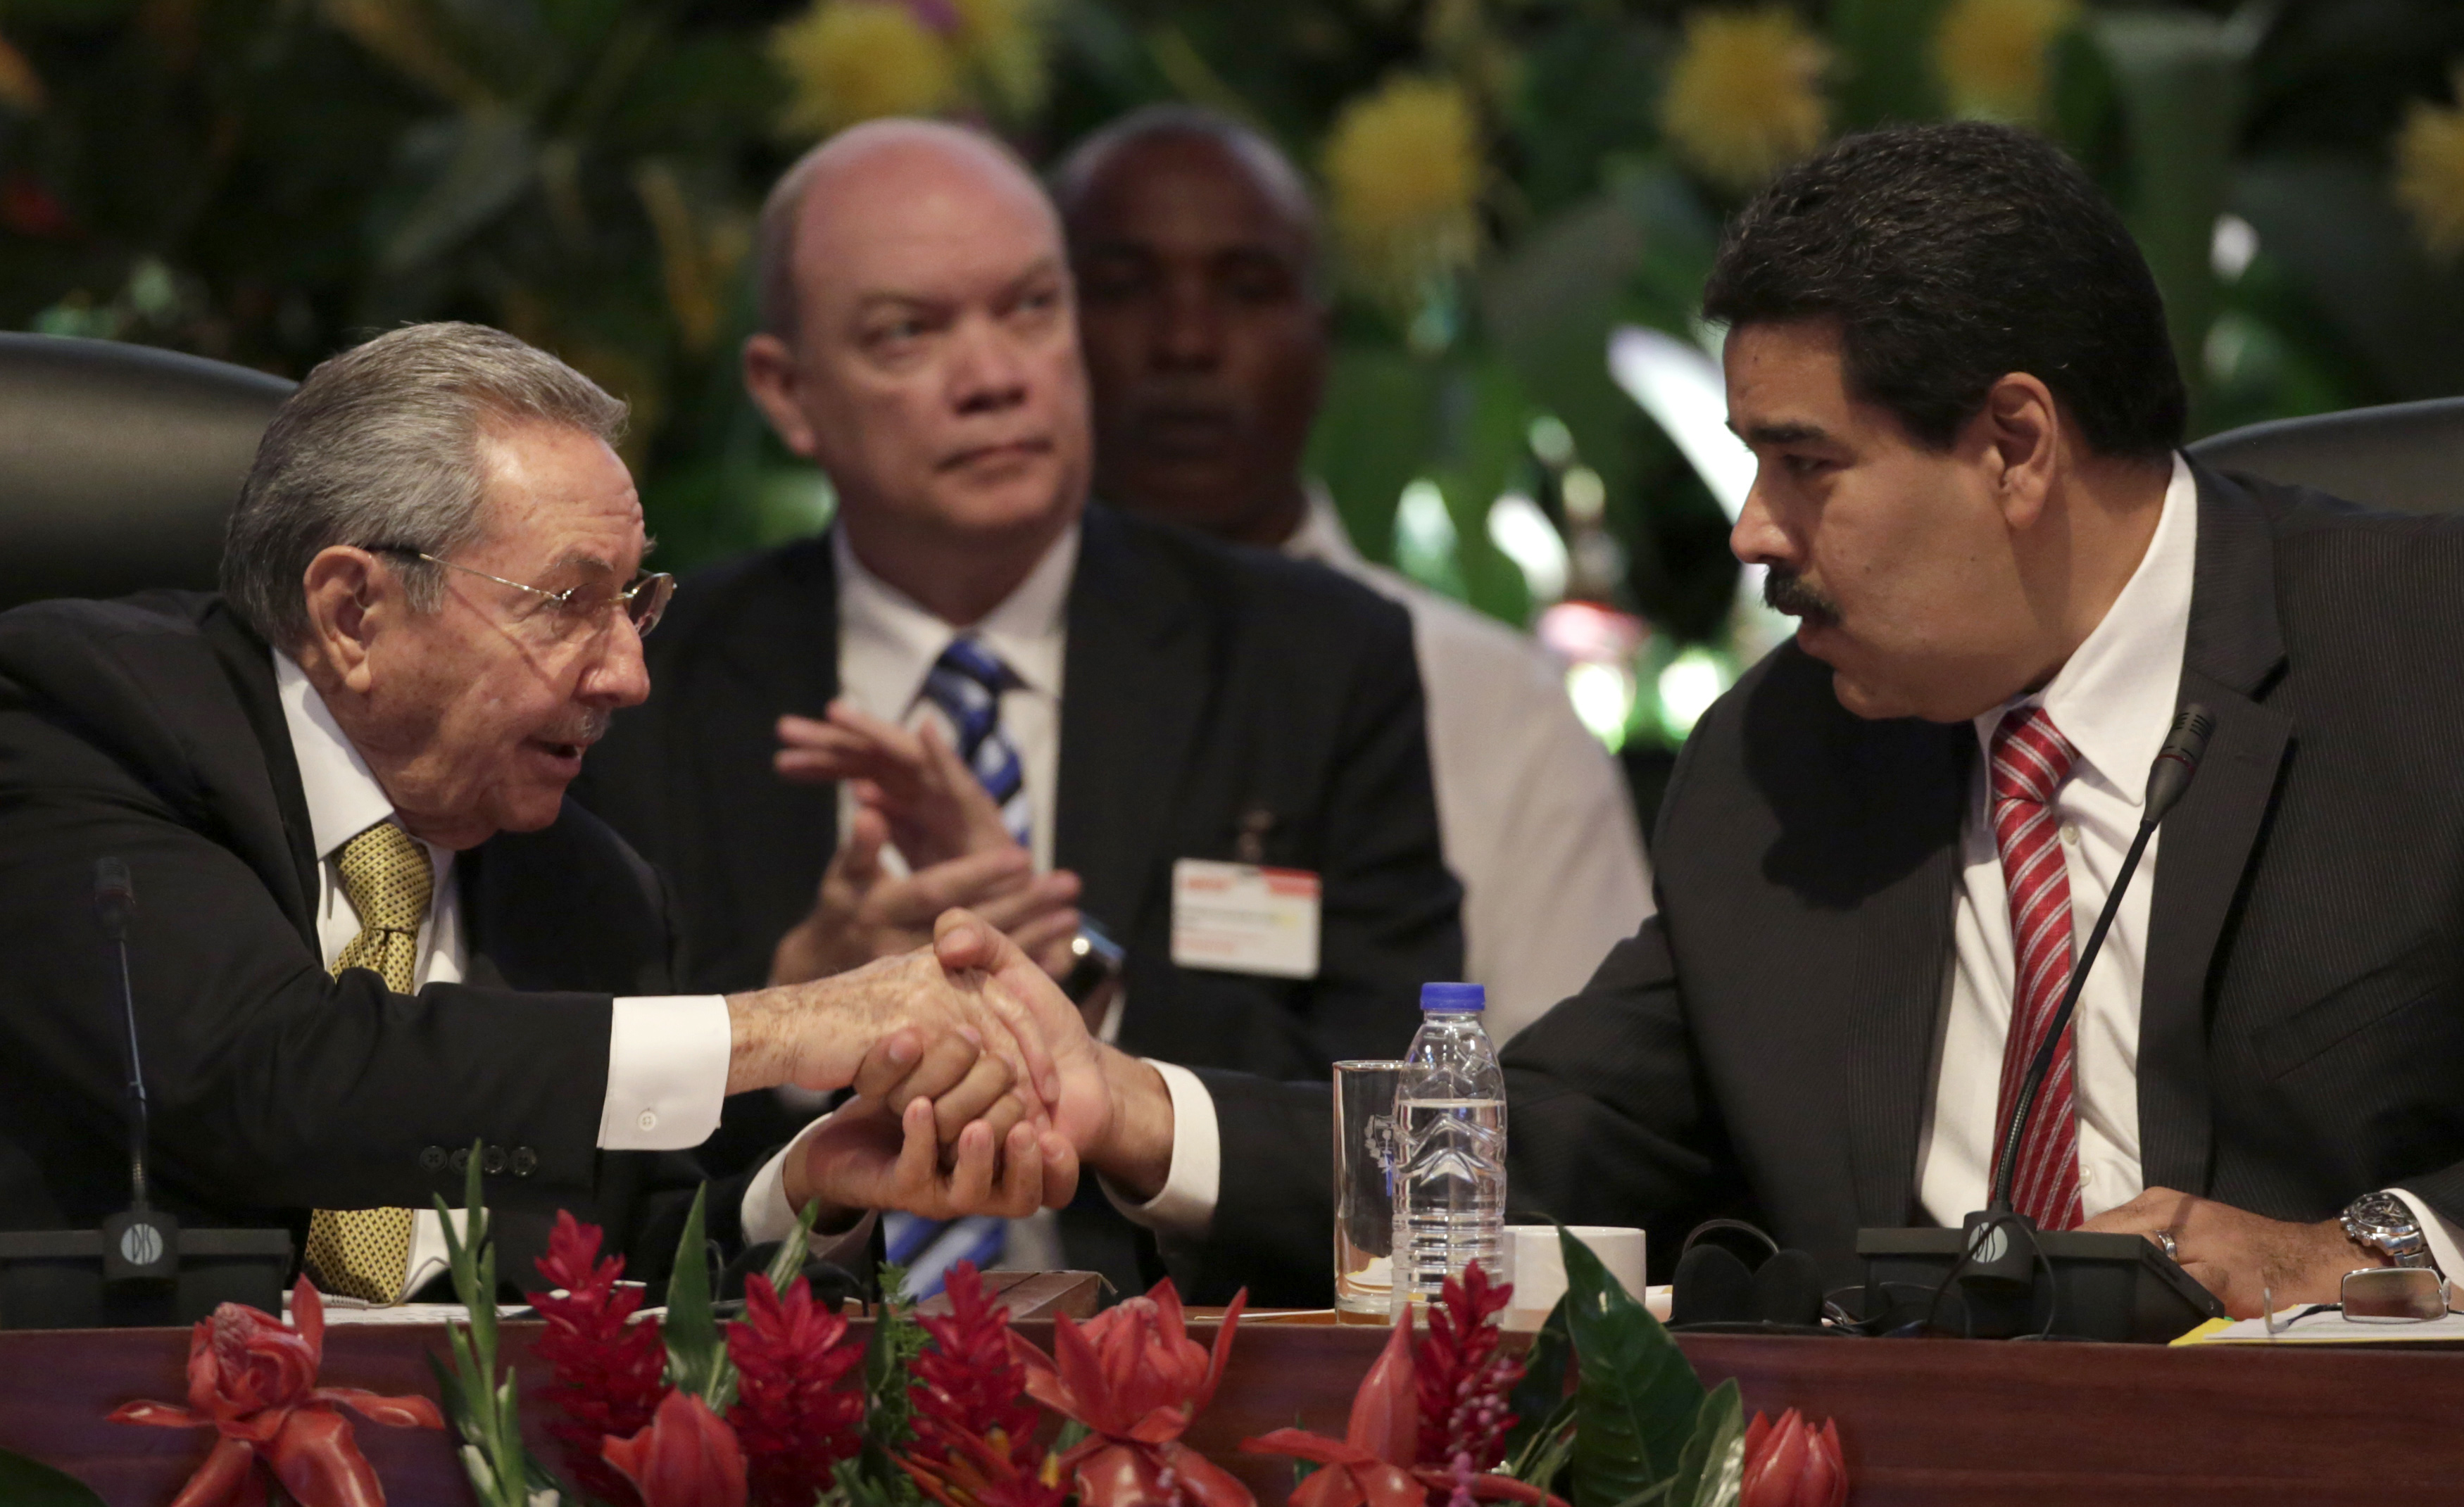 From Left: Cuba's President Raul Castro shakes hands with Venezuela's President Nicolas Maduro during the opening session of the 10th ALBA alliance summit in Havana on Dec. 14, 2014. (© Enrique de la Osa / Reuters—REUTERS)